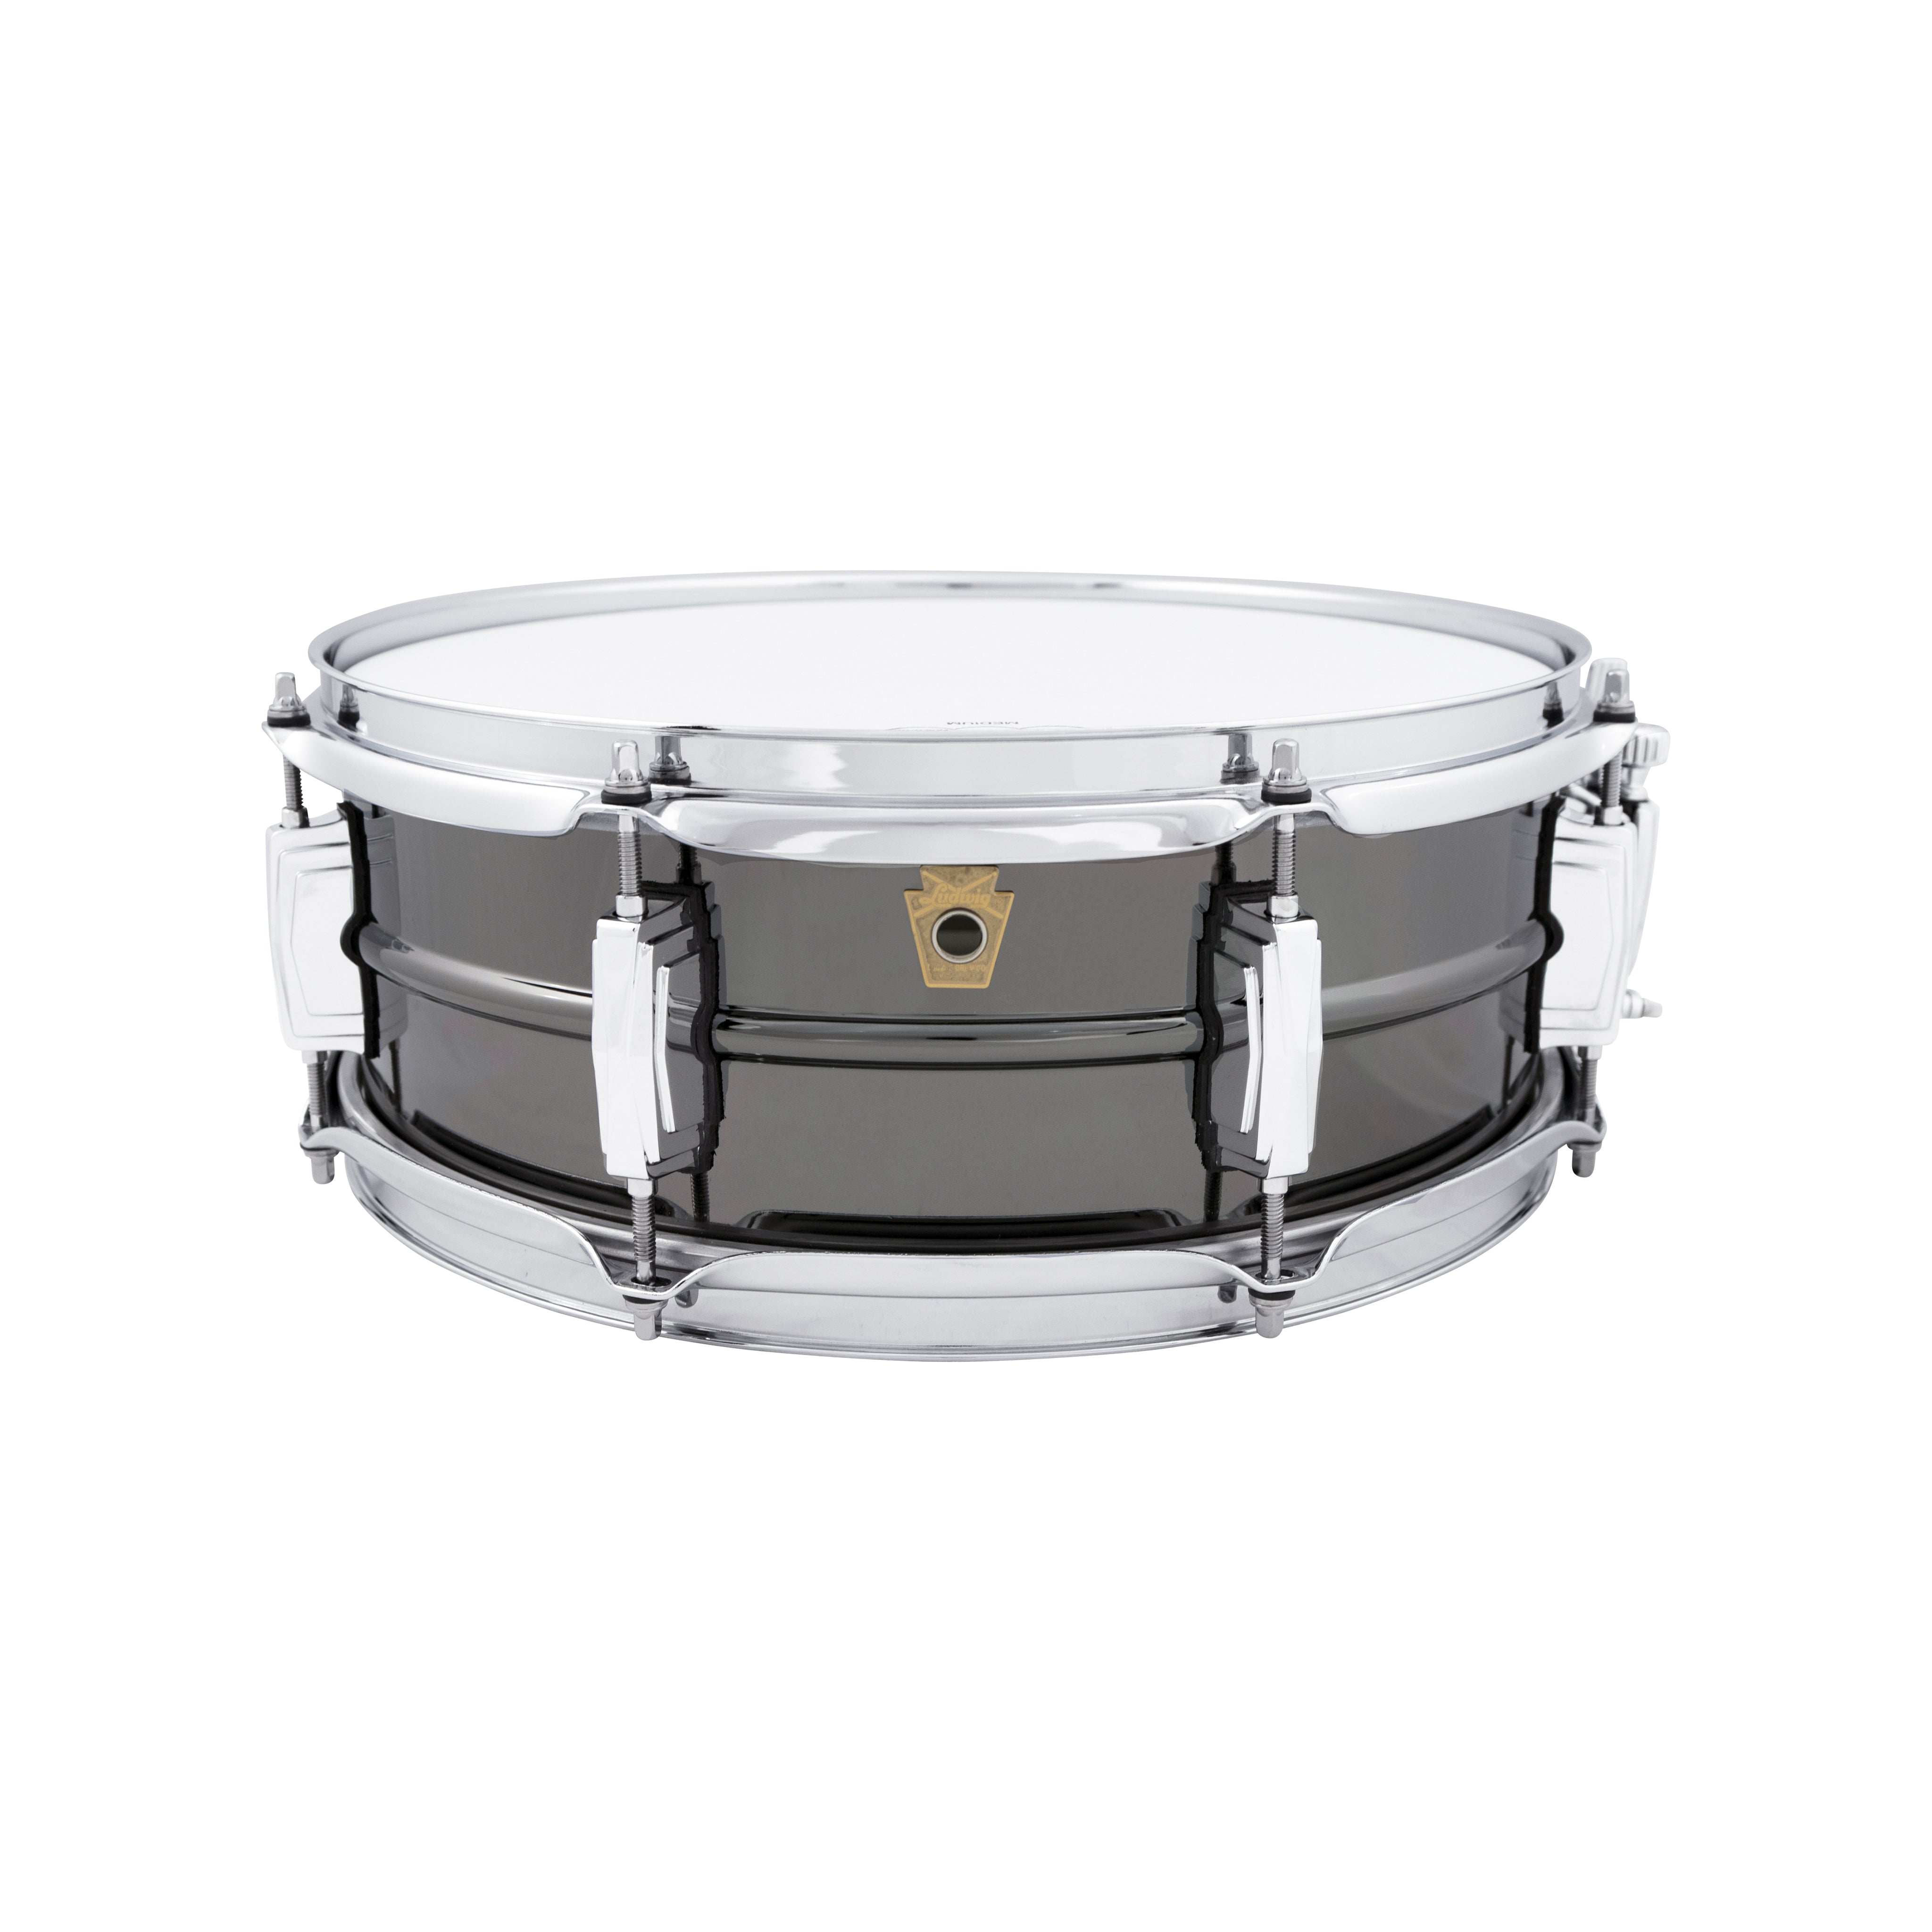 Ludwig LB414 5x14inch Black Beauty Brass Snare Drum, Smooth Shell, 8x Imperial Lugs